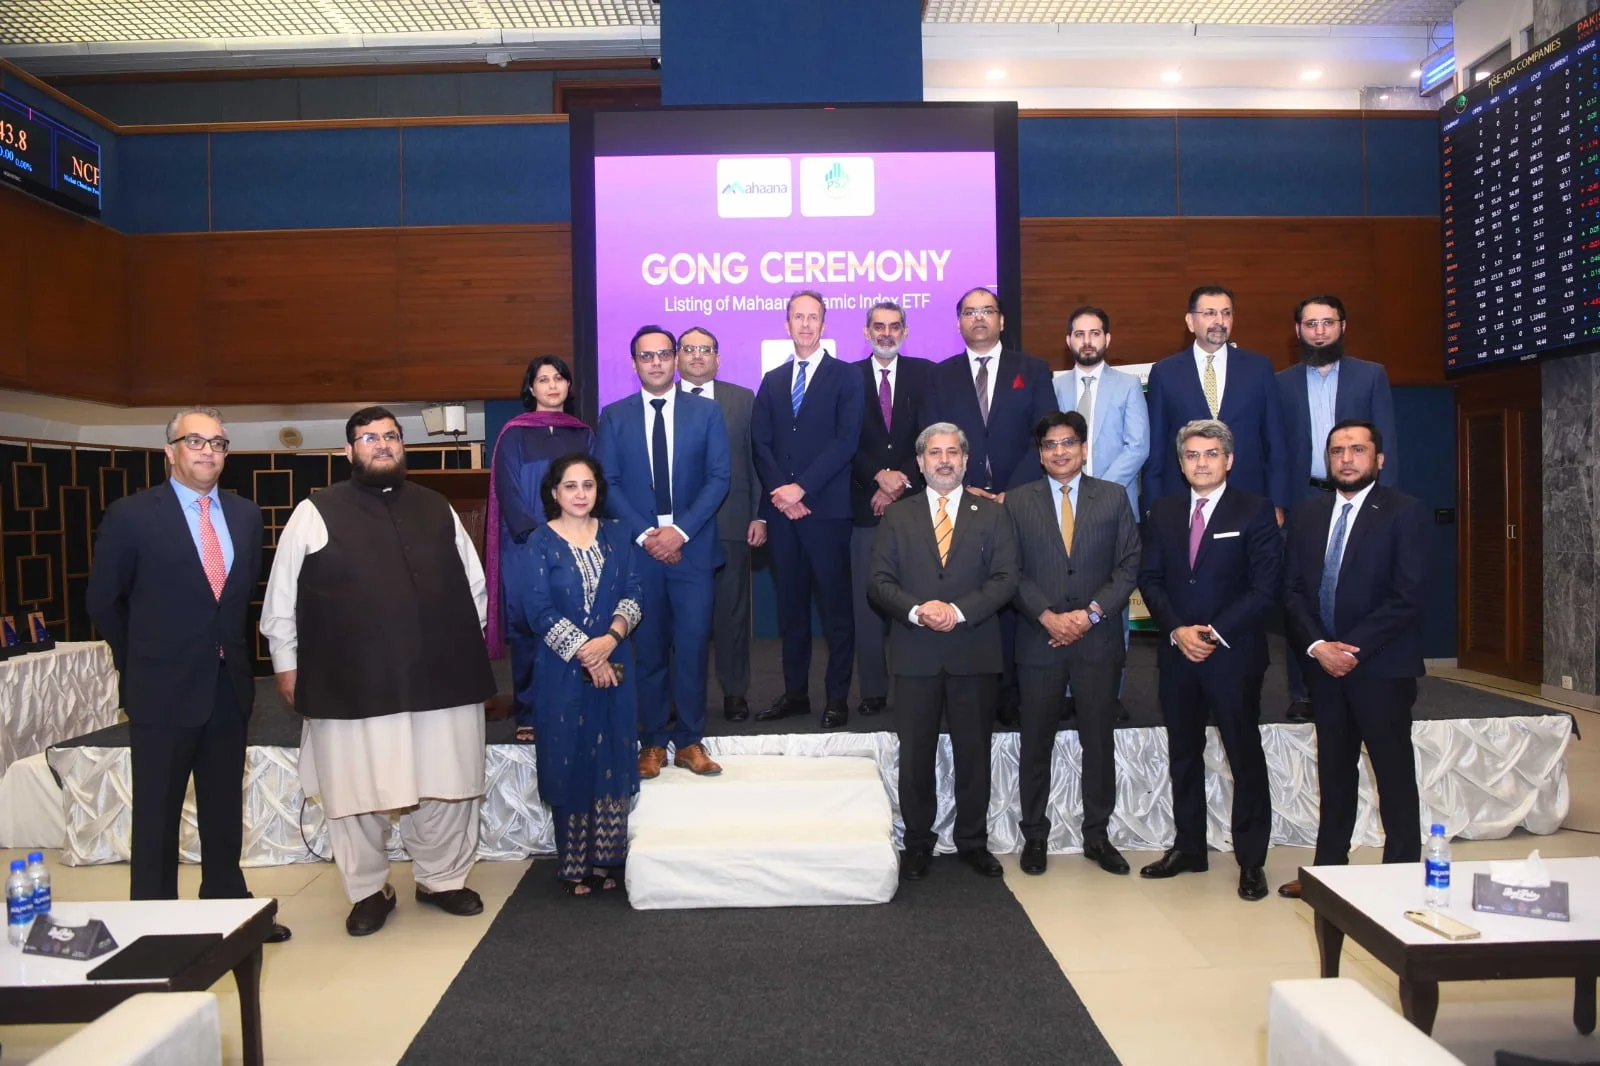 Mahaana Islamic Index ETF Listed at PSX in Gong Ceremony